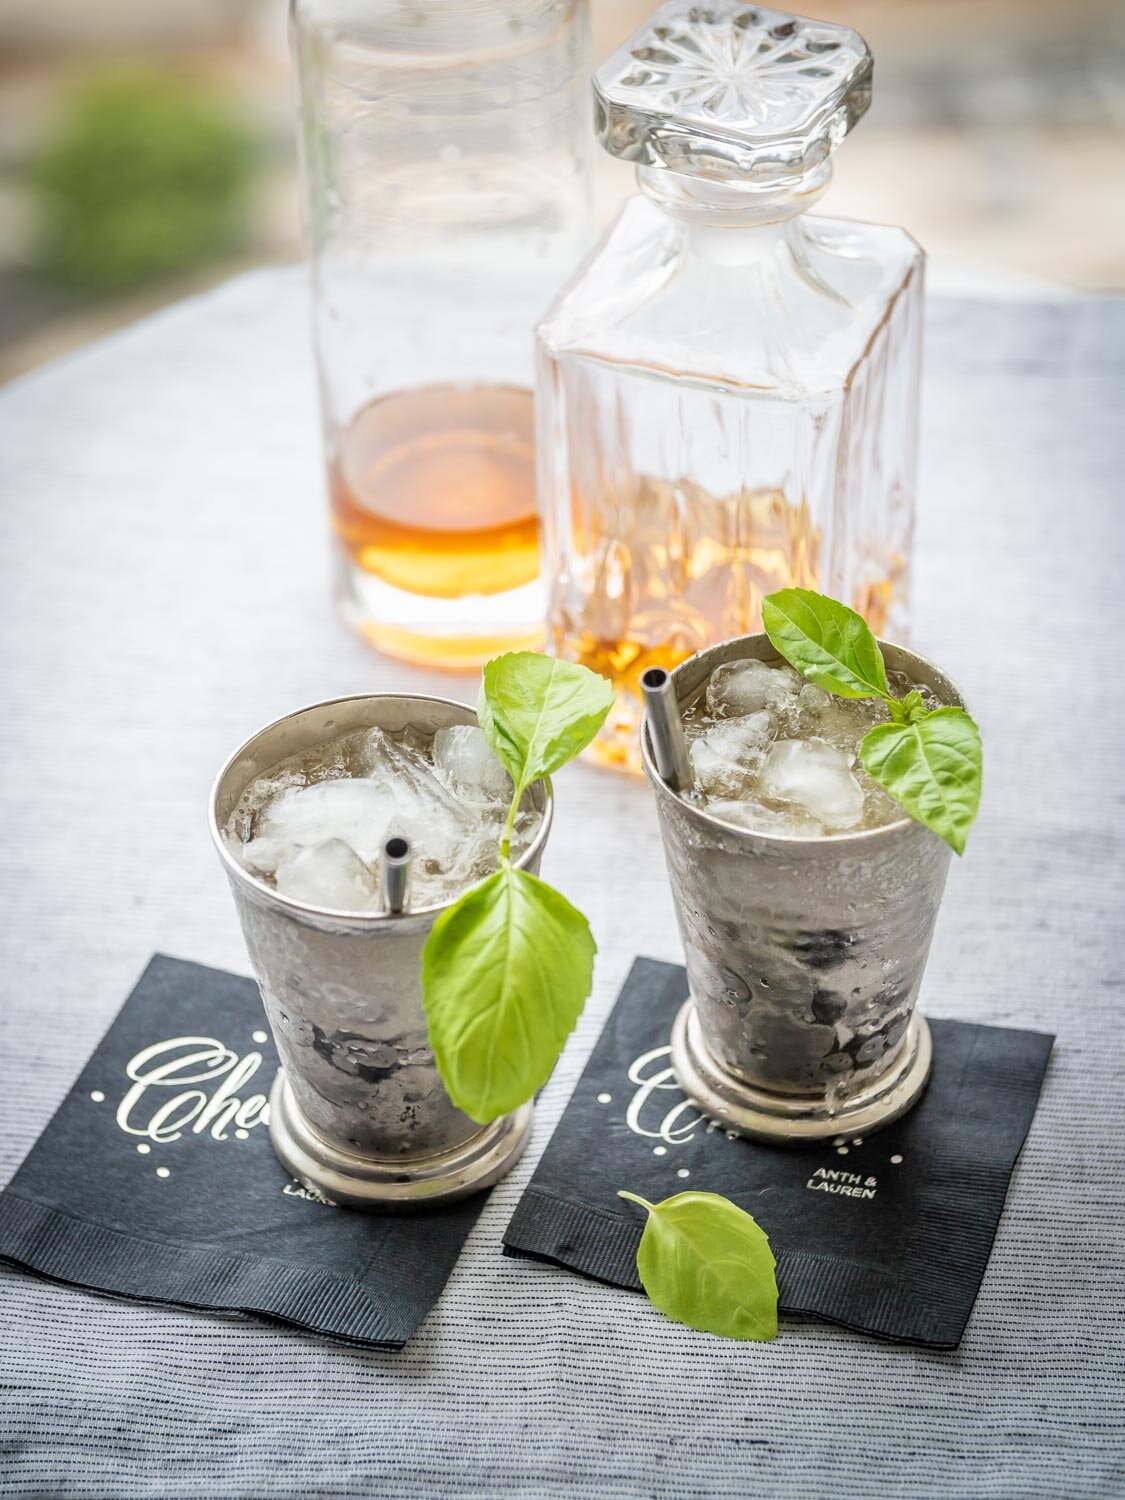  Yes, I realize those are basil leaves for a Basil Julep. But I loved this picture and needed something for this post. 